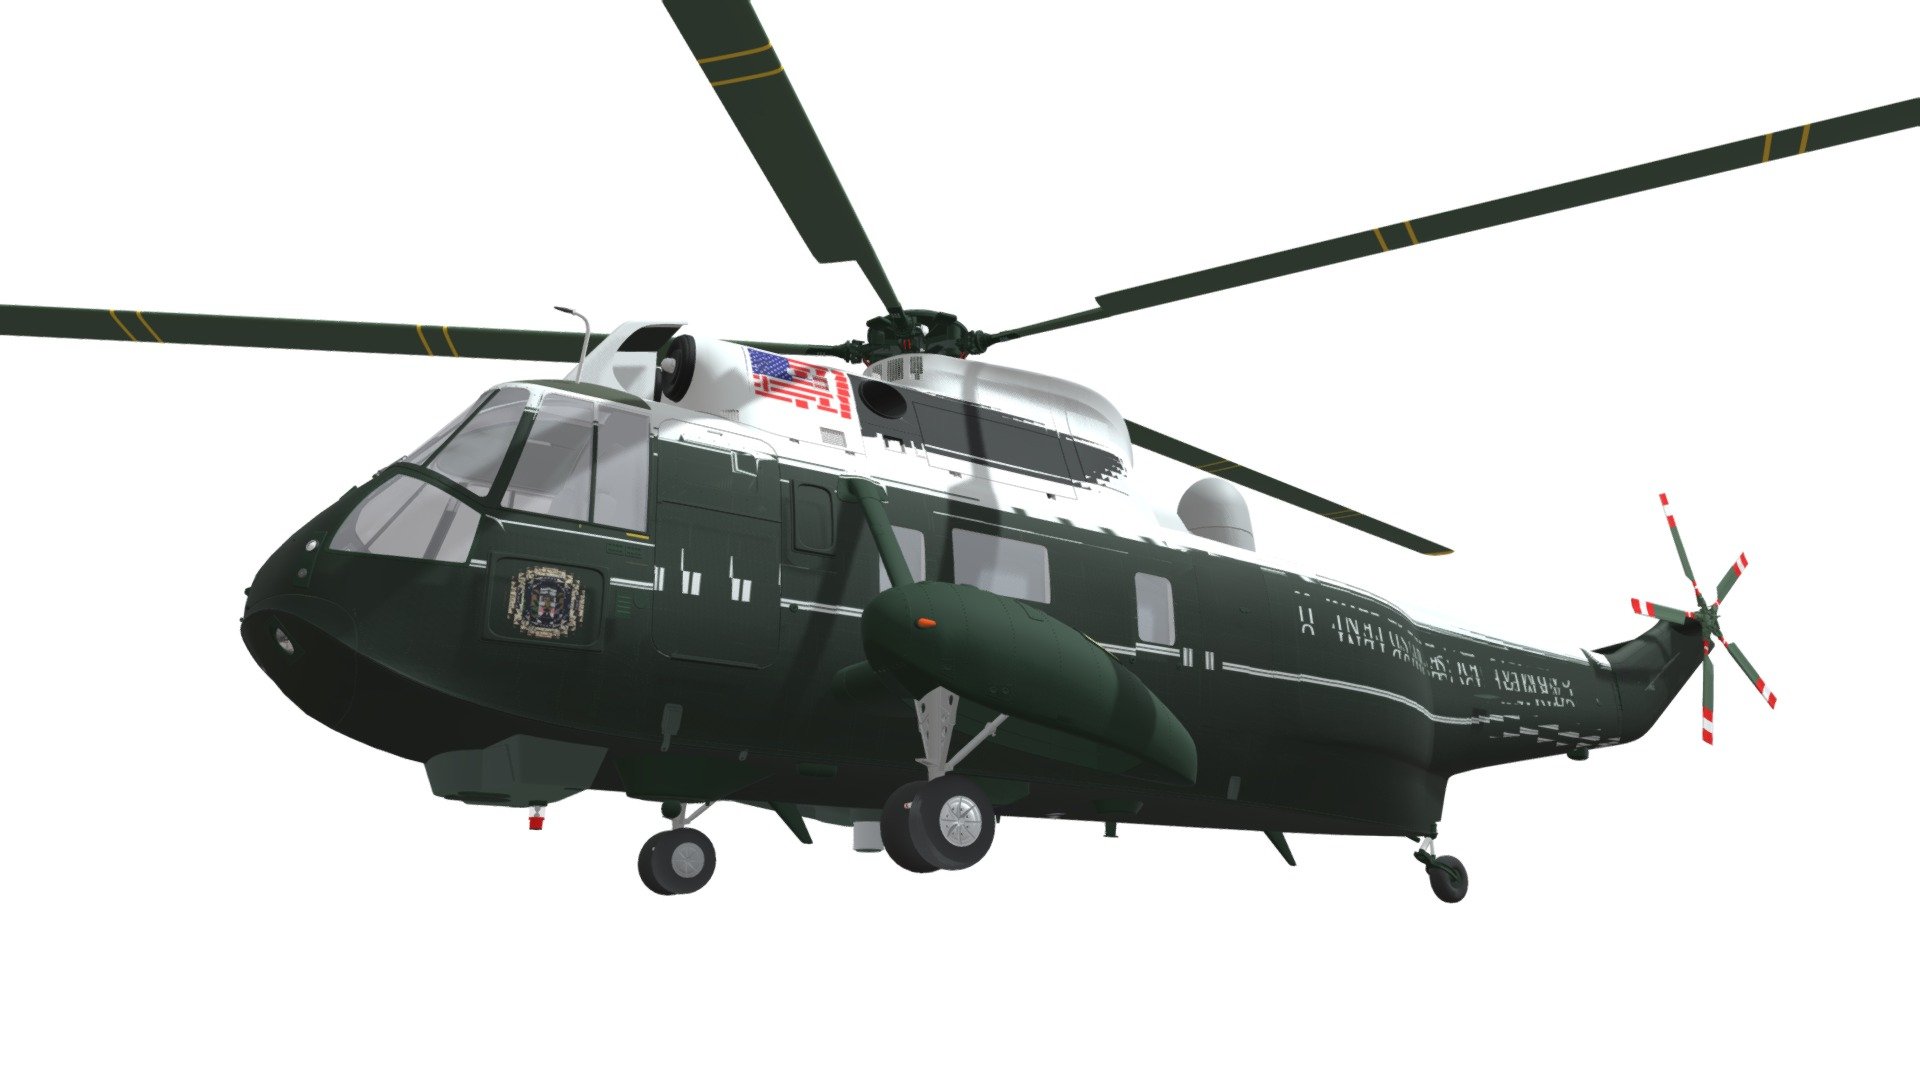 High quality 3d model of marine one helicopter 3d model